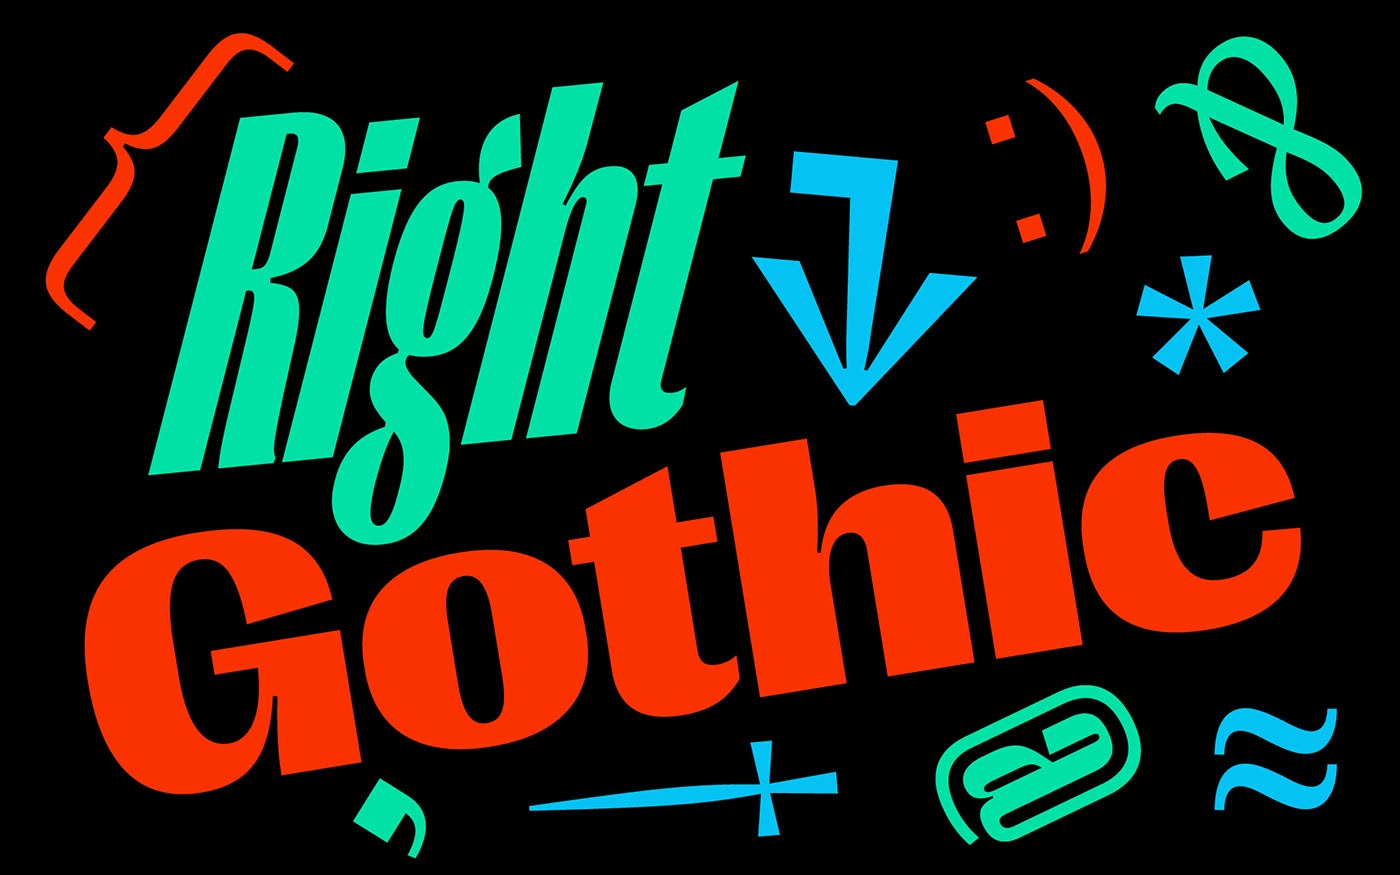 PP Right Gothic